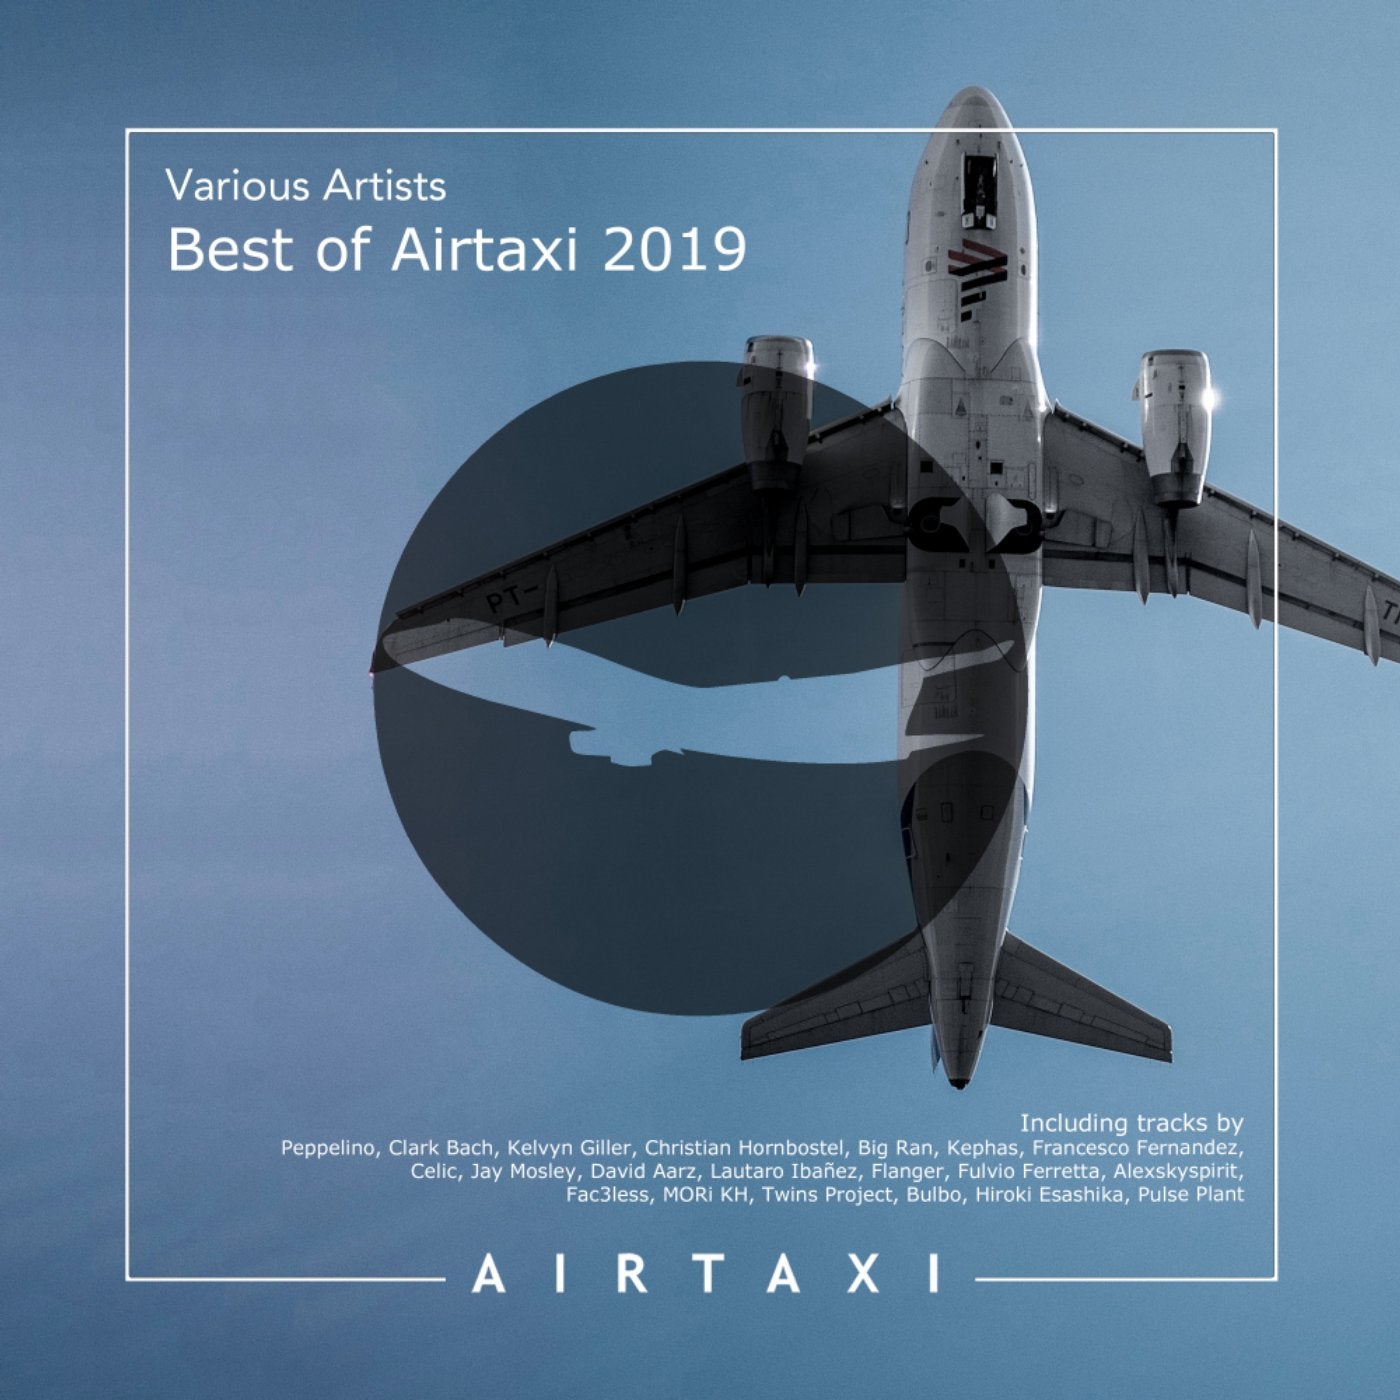 Best of Airtaxi 2019